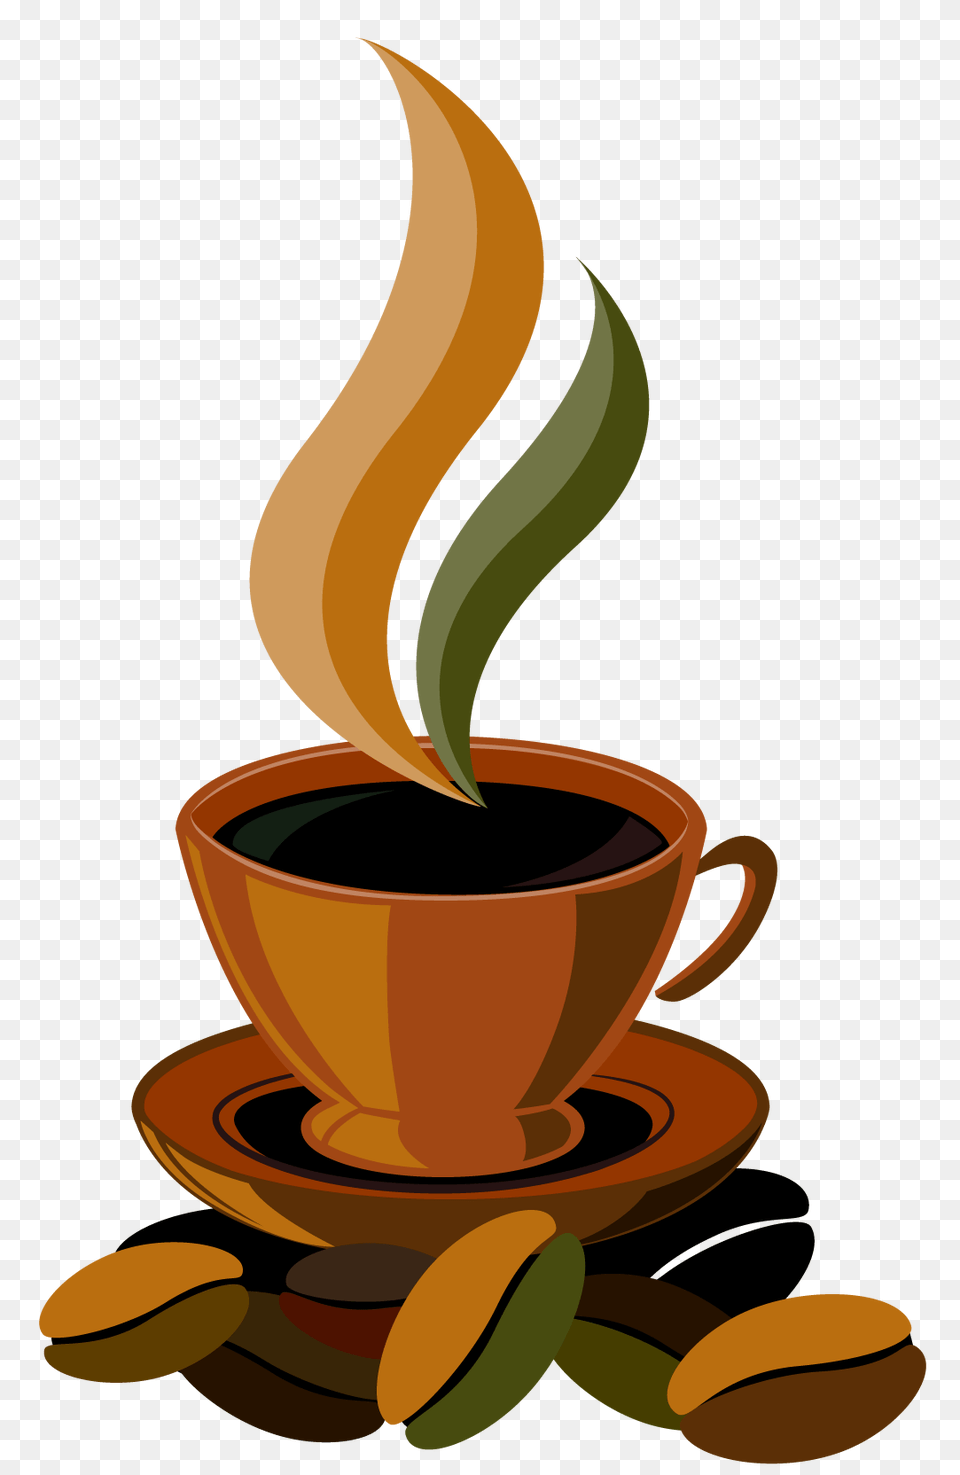 Starbucks Coffee Cup Clip Art, Beverage, Coffee Cup Free Transparent Png